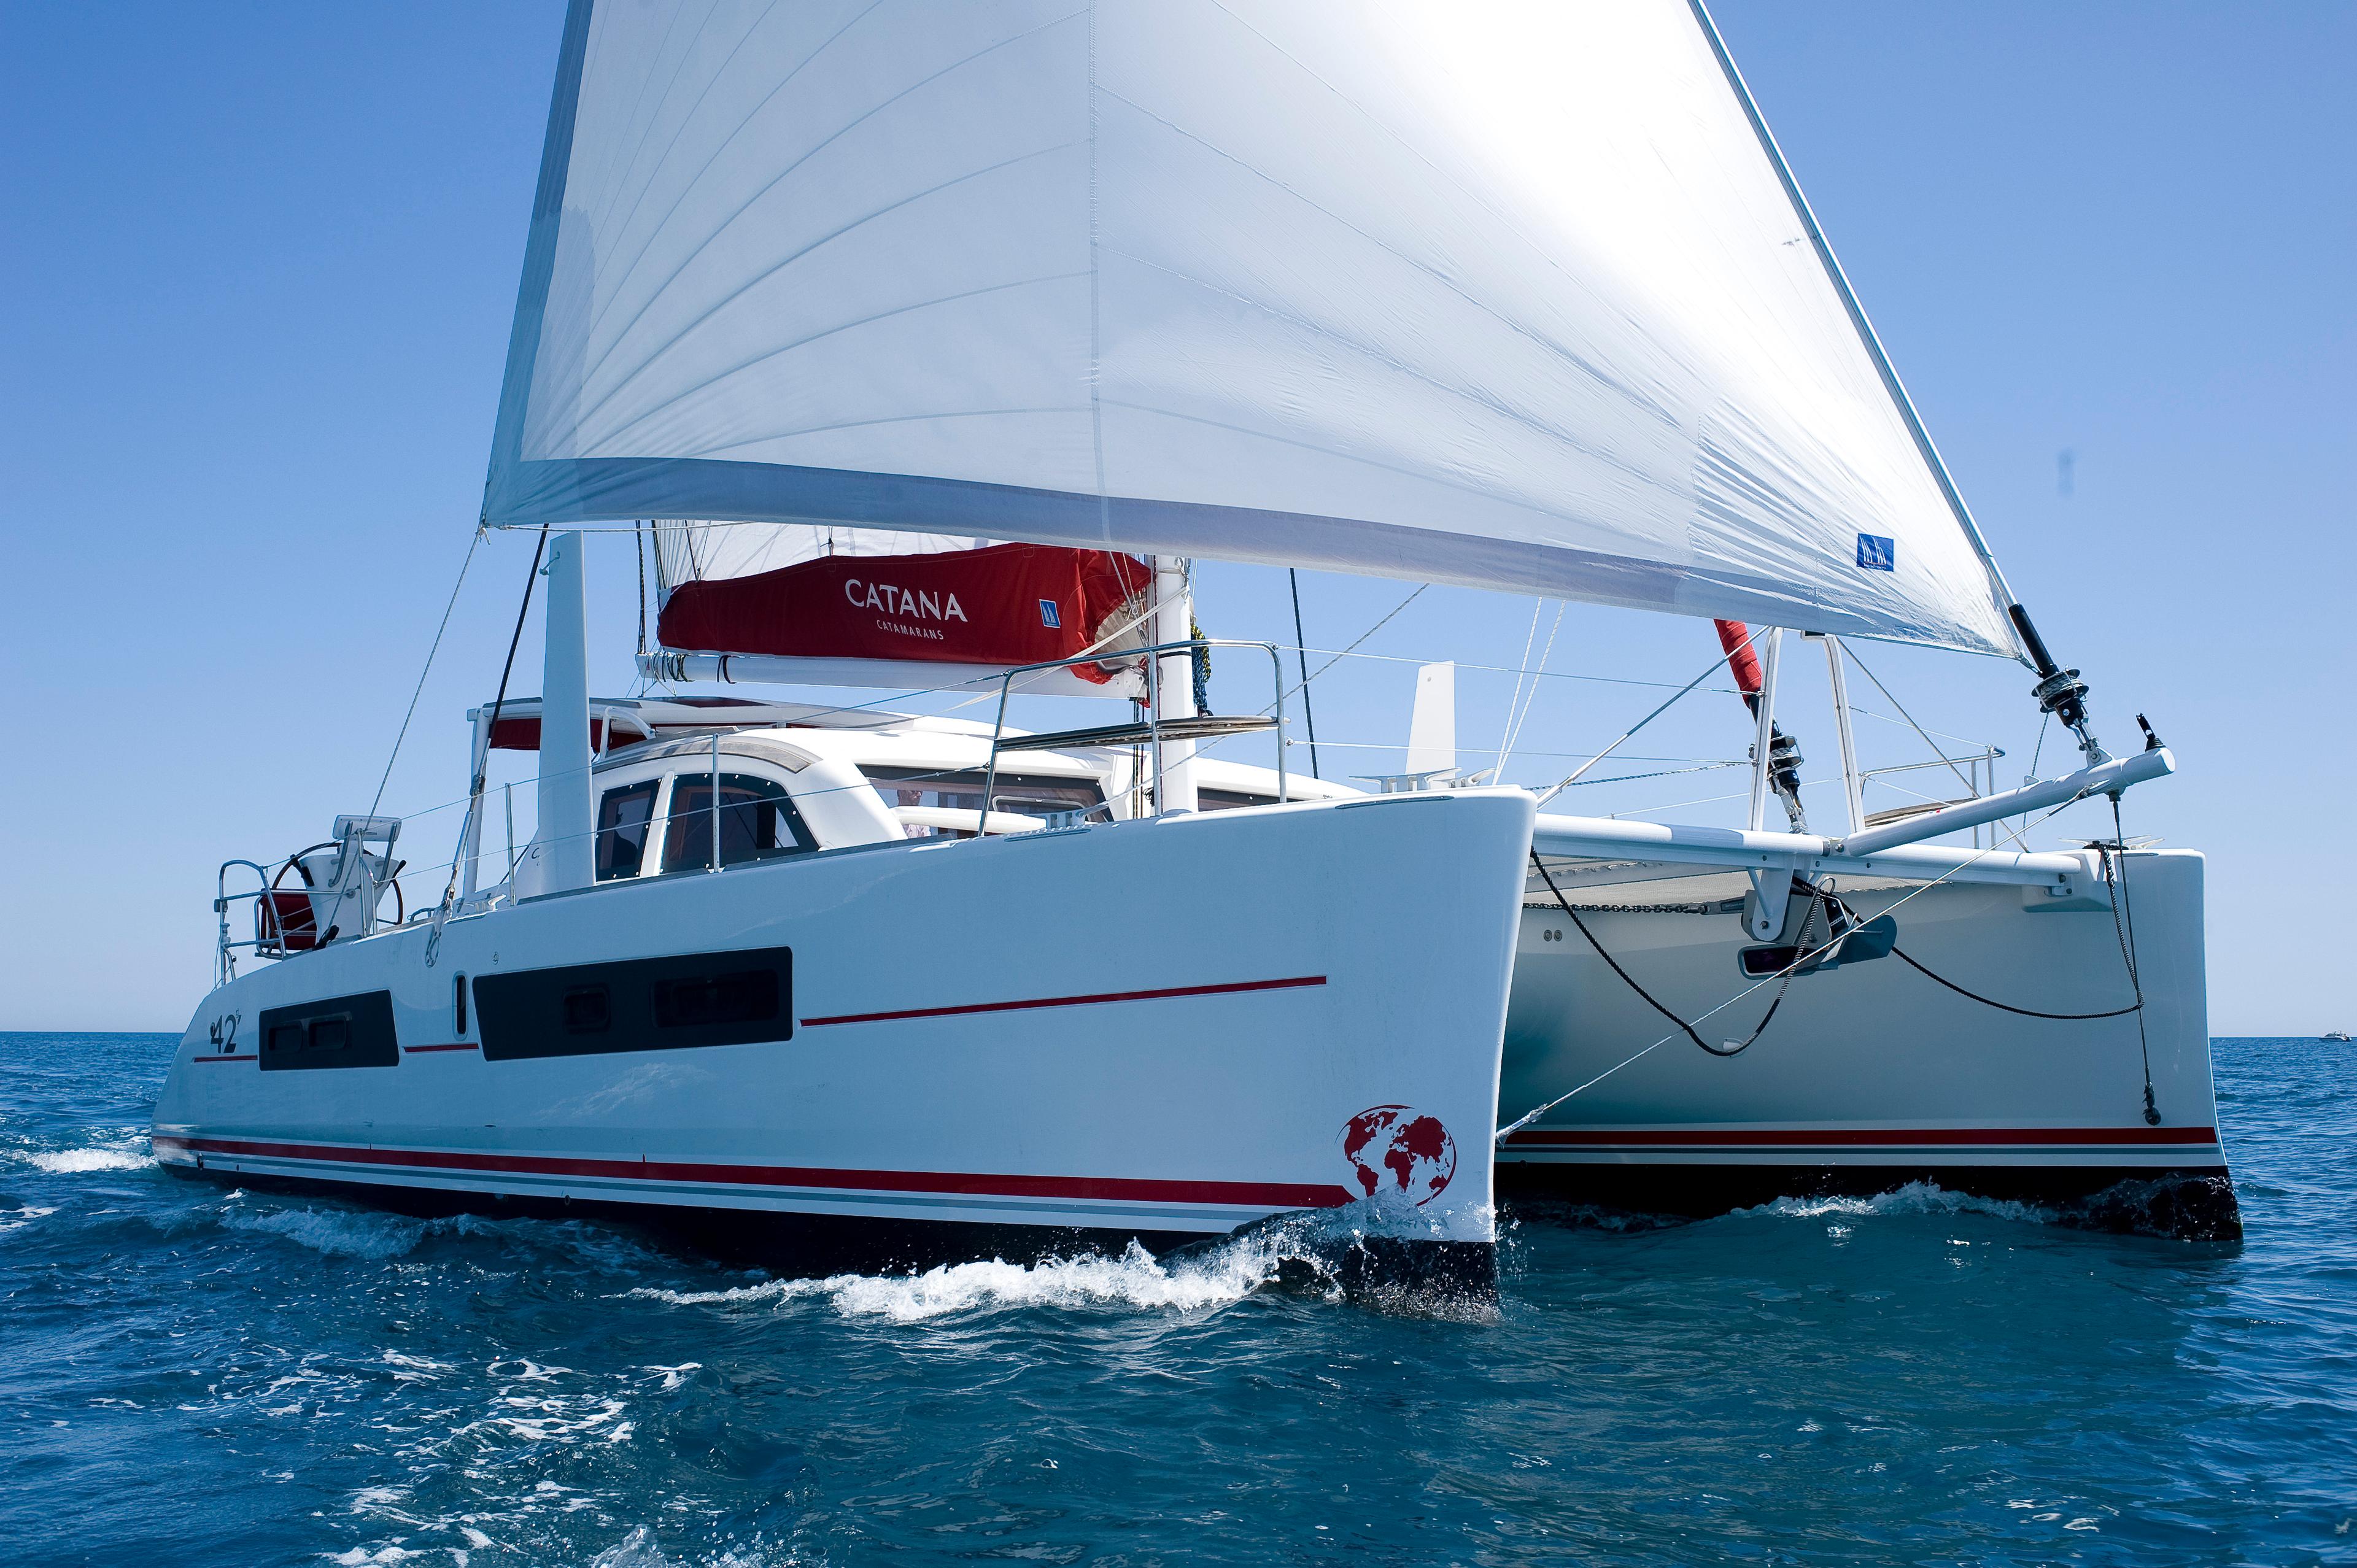 …AND CATANA 42 CUTS AHEAD OF THE COMPETITION